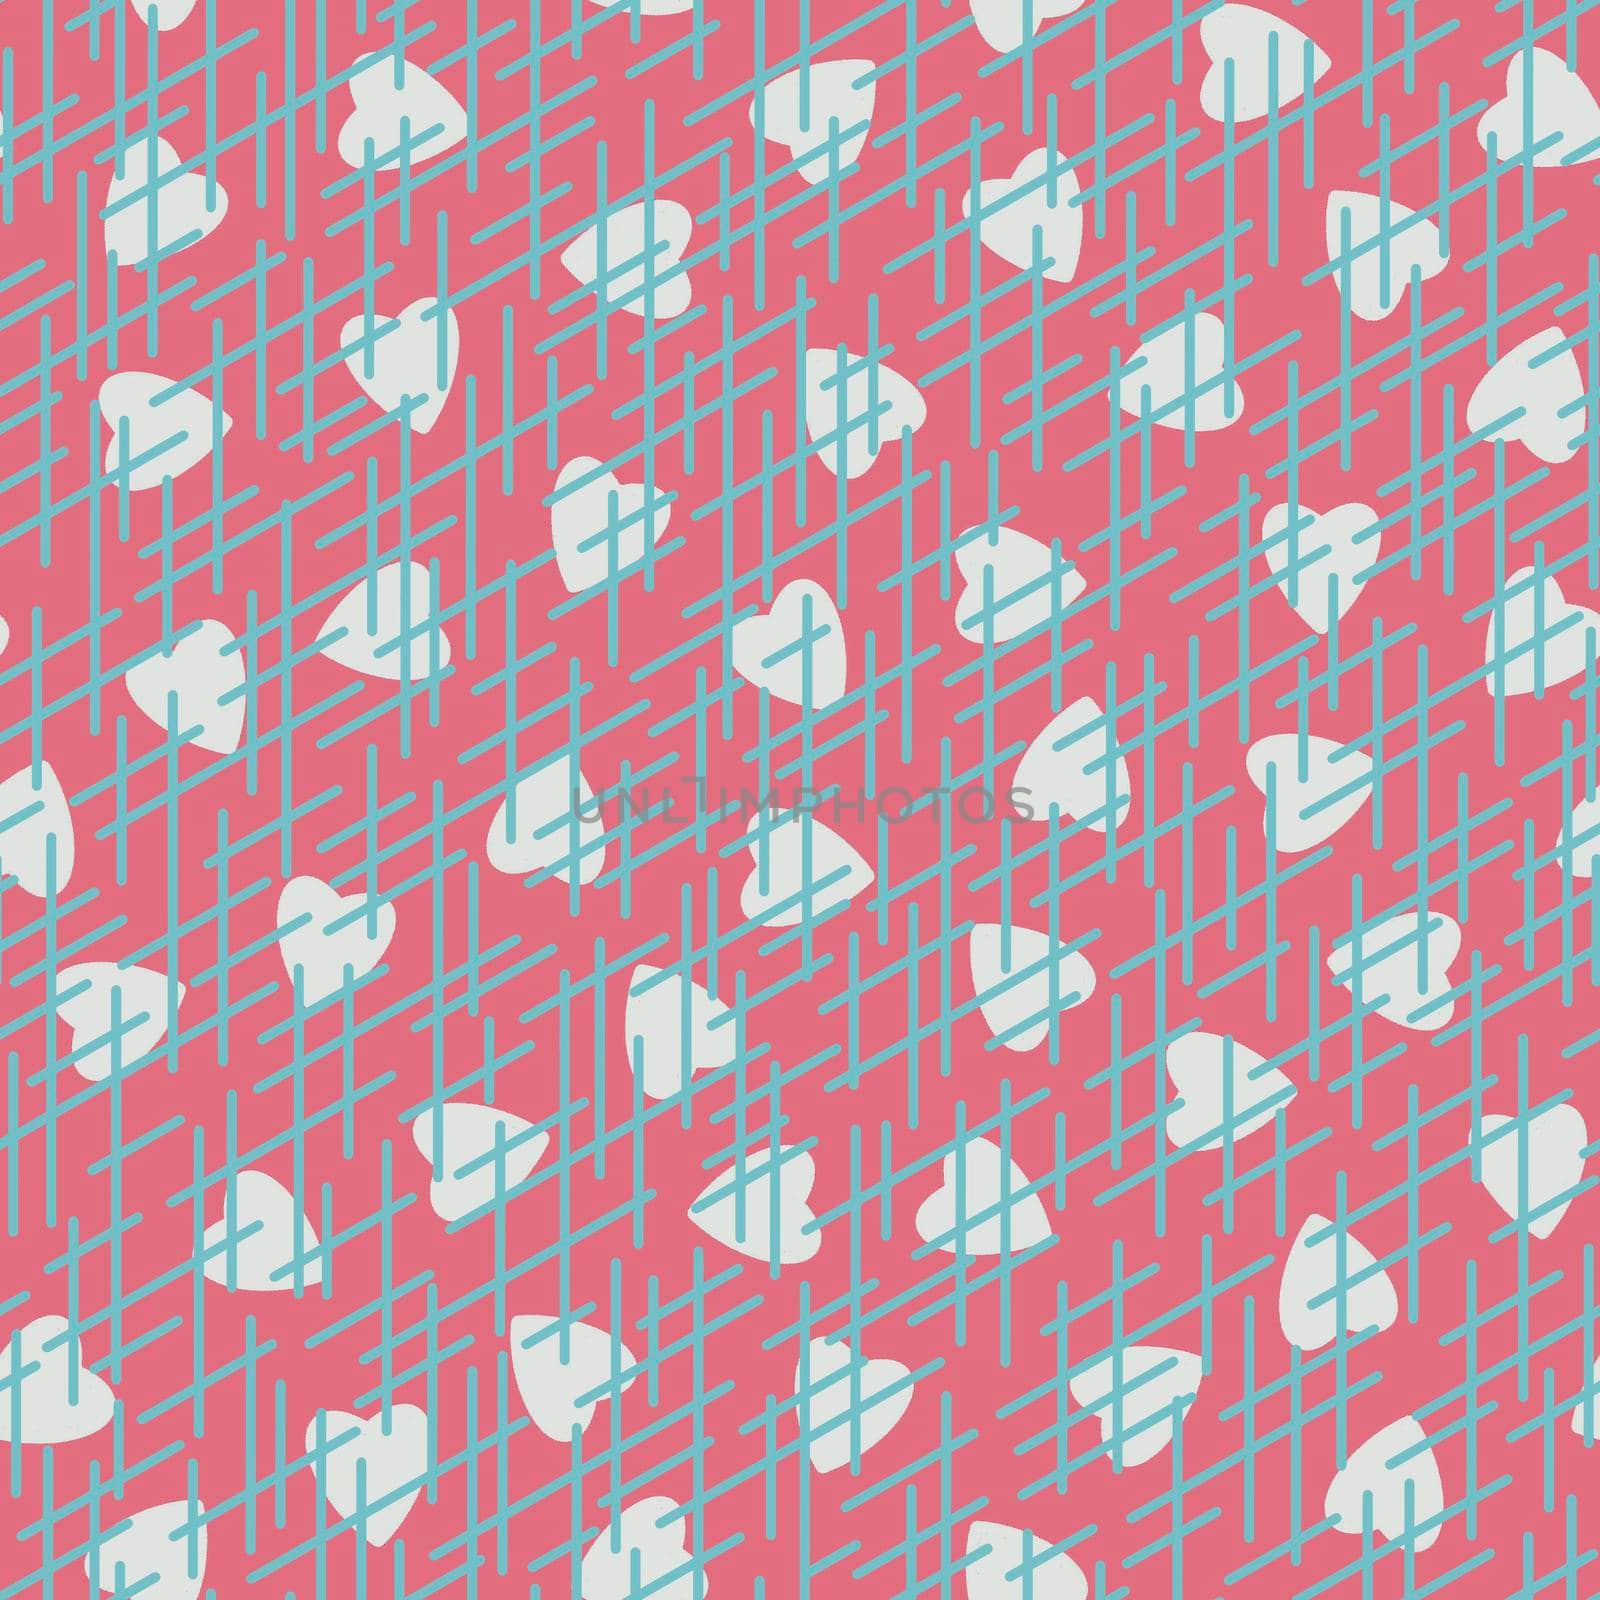 Randomly crossing lines making pattern.Chaotic short lines seamless pattern,chips and sticks modern repeatable motif.Good for print, textile,fabric, background, wrapping paper.Pink azure white colors.